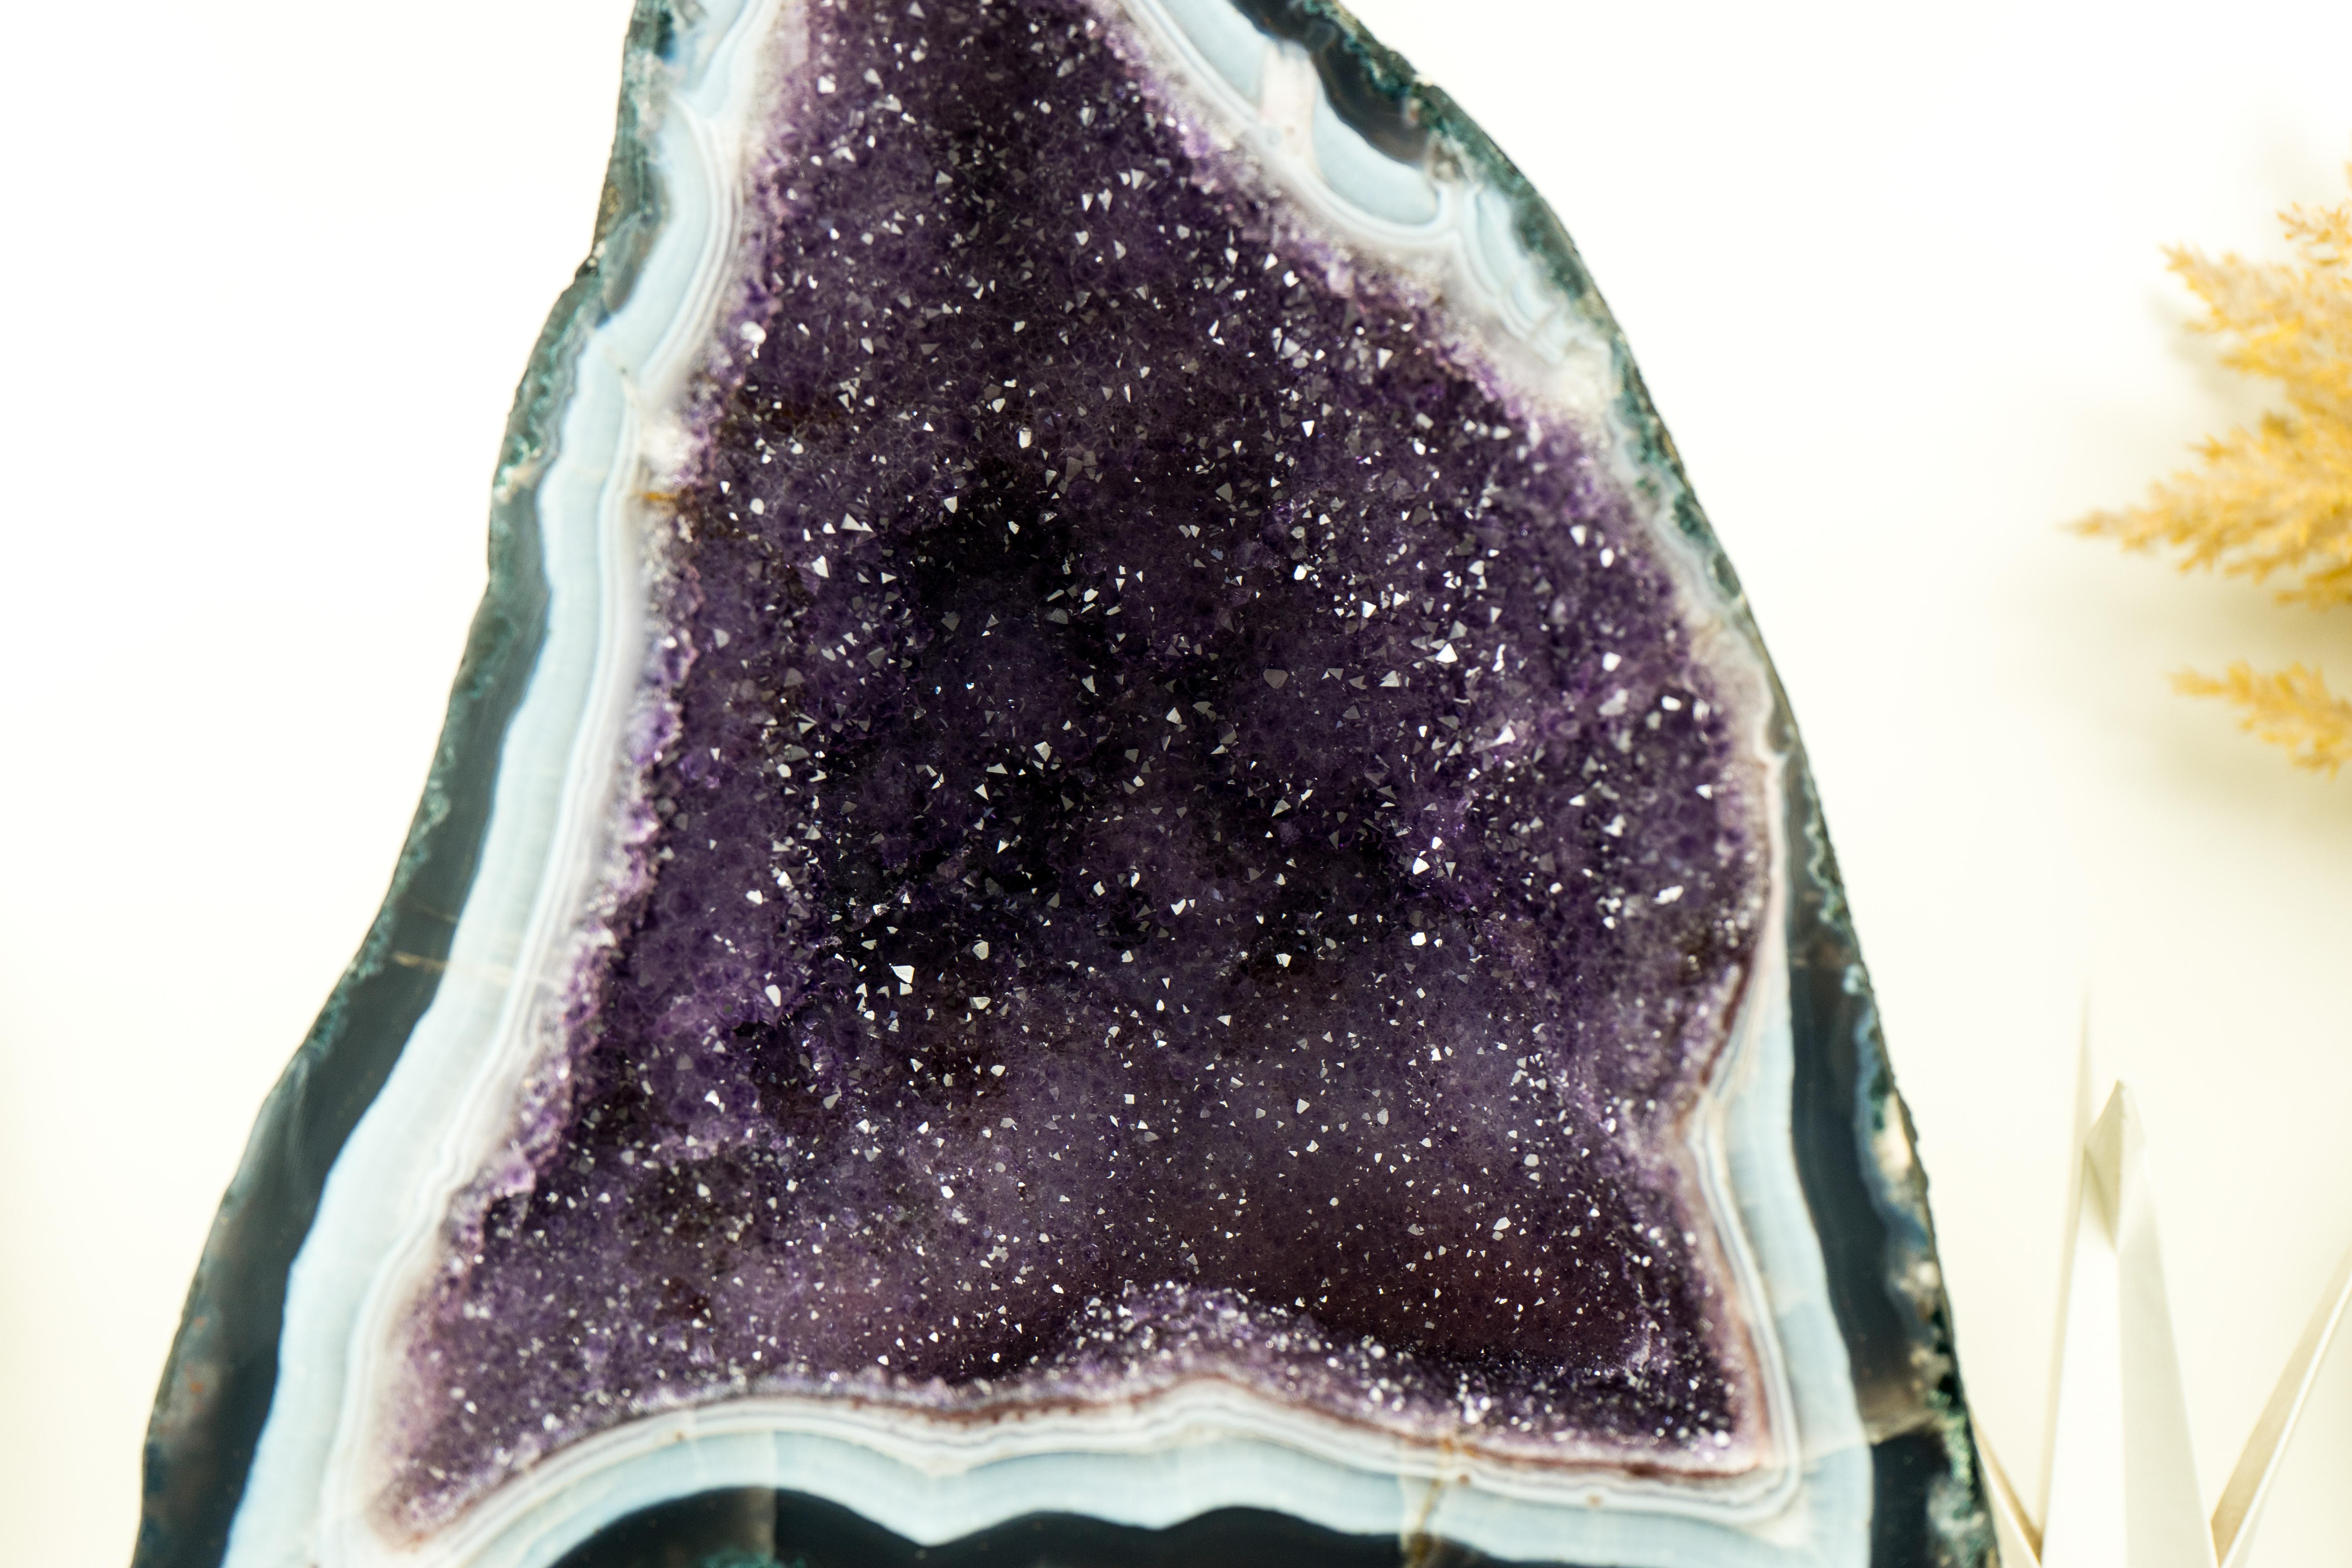 Brazilian Lilac Galaxy Amethyst Crystal Geode on Blue and White Lace Matrix For Sale